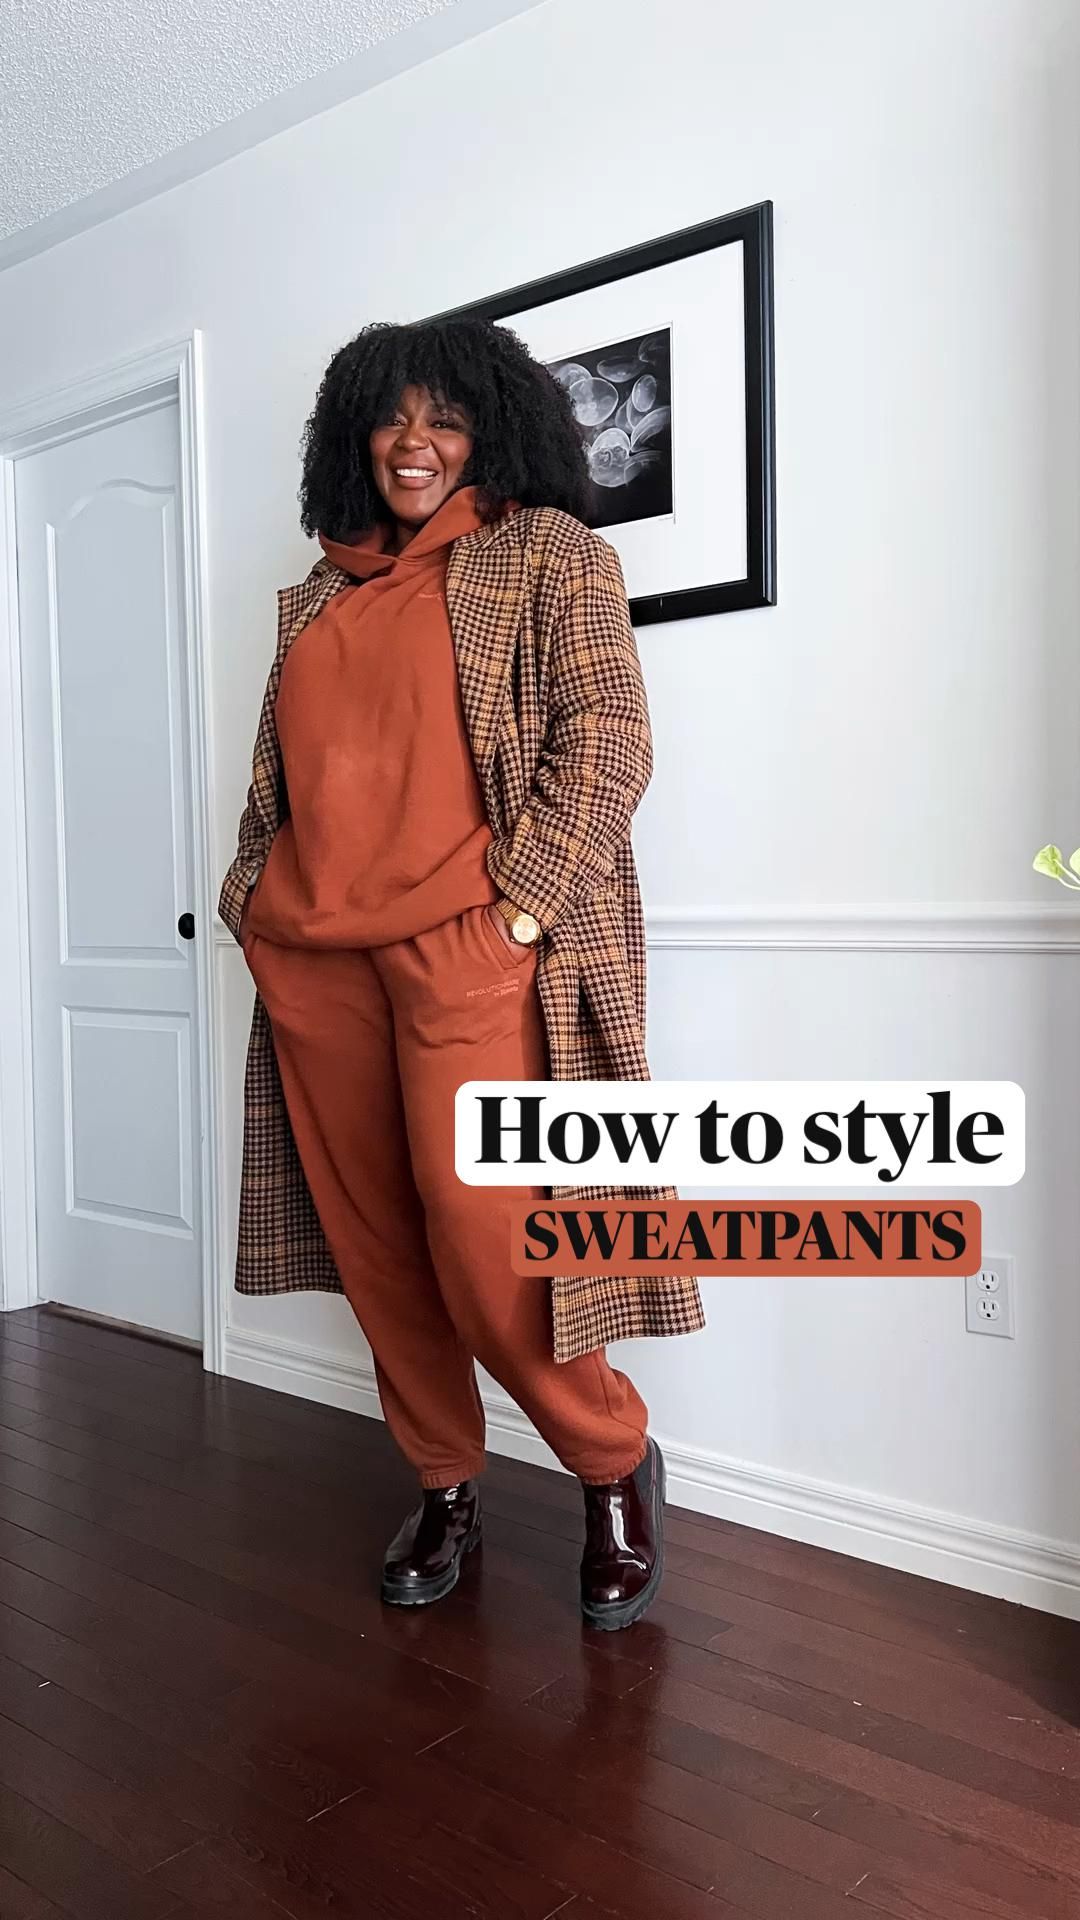 How to style sweatpants outfit black girl